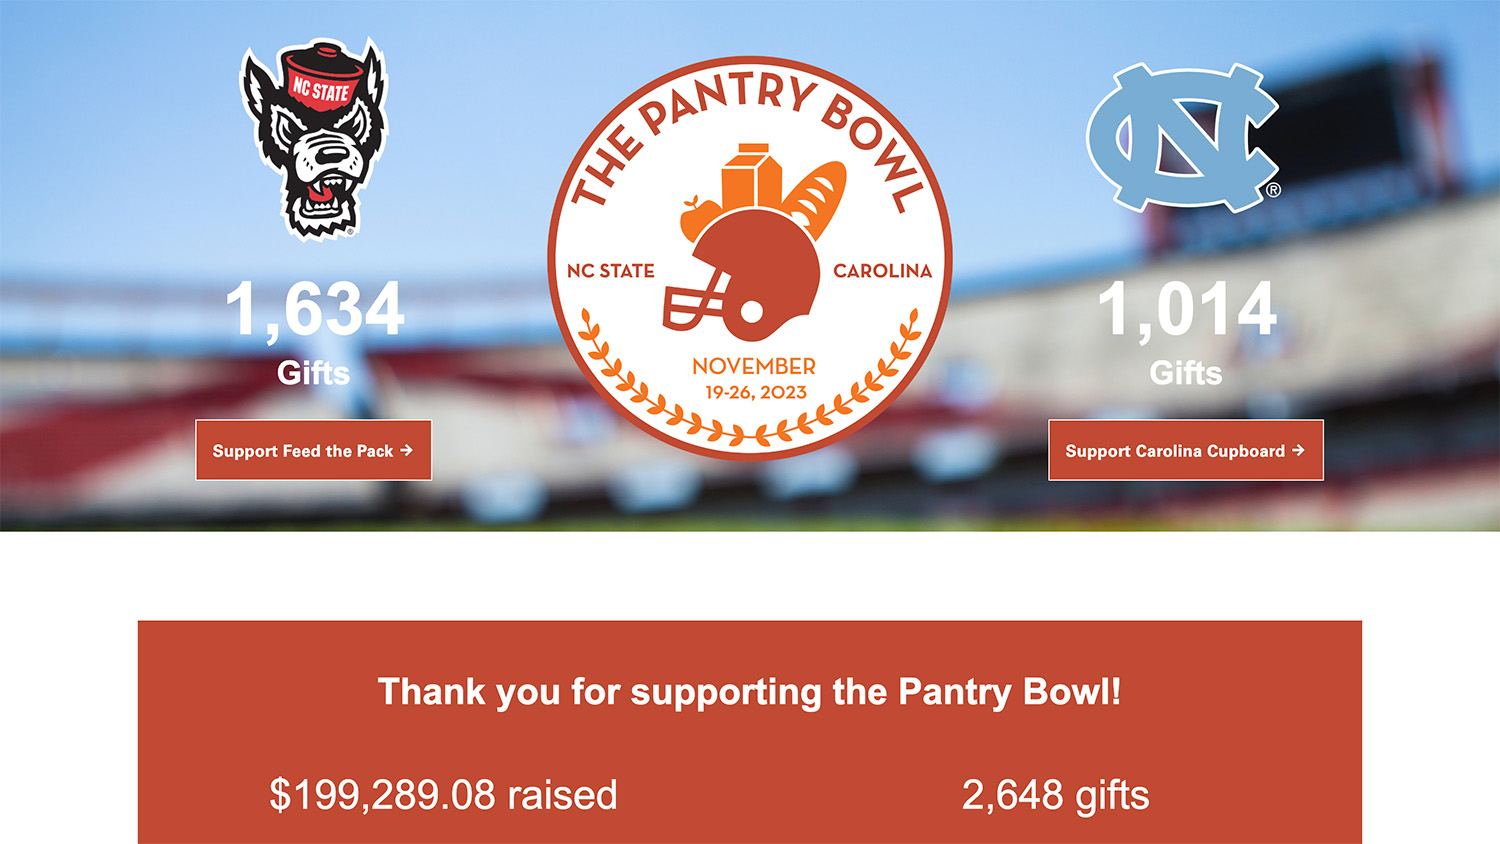 NC State defeated UNC in the third annual pantry bowl.